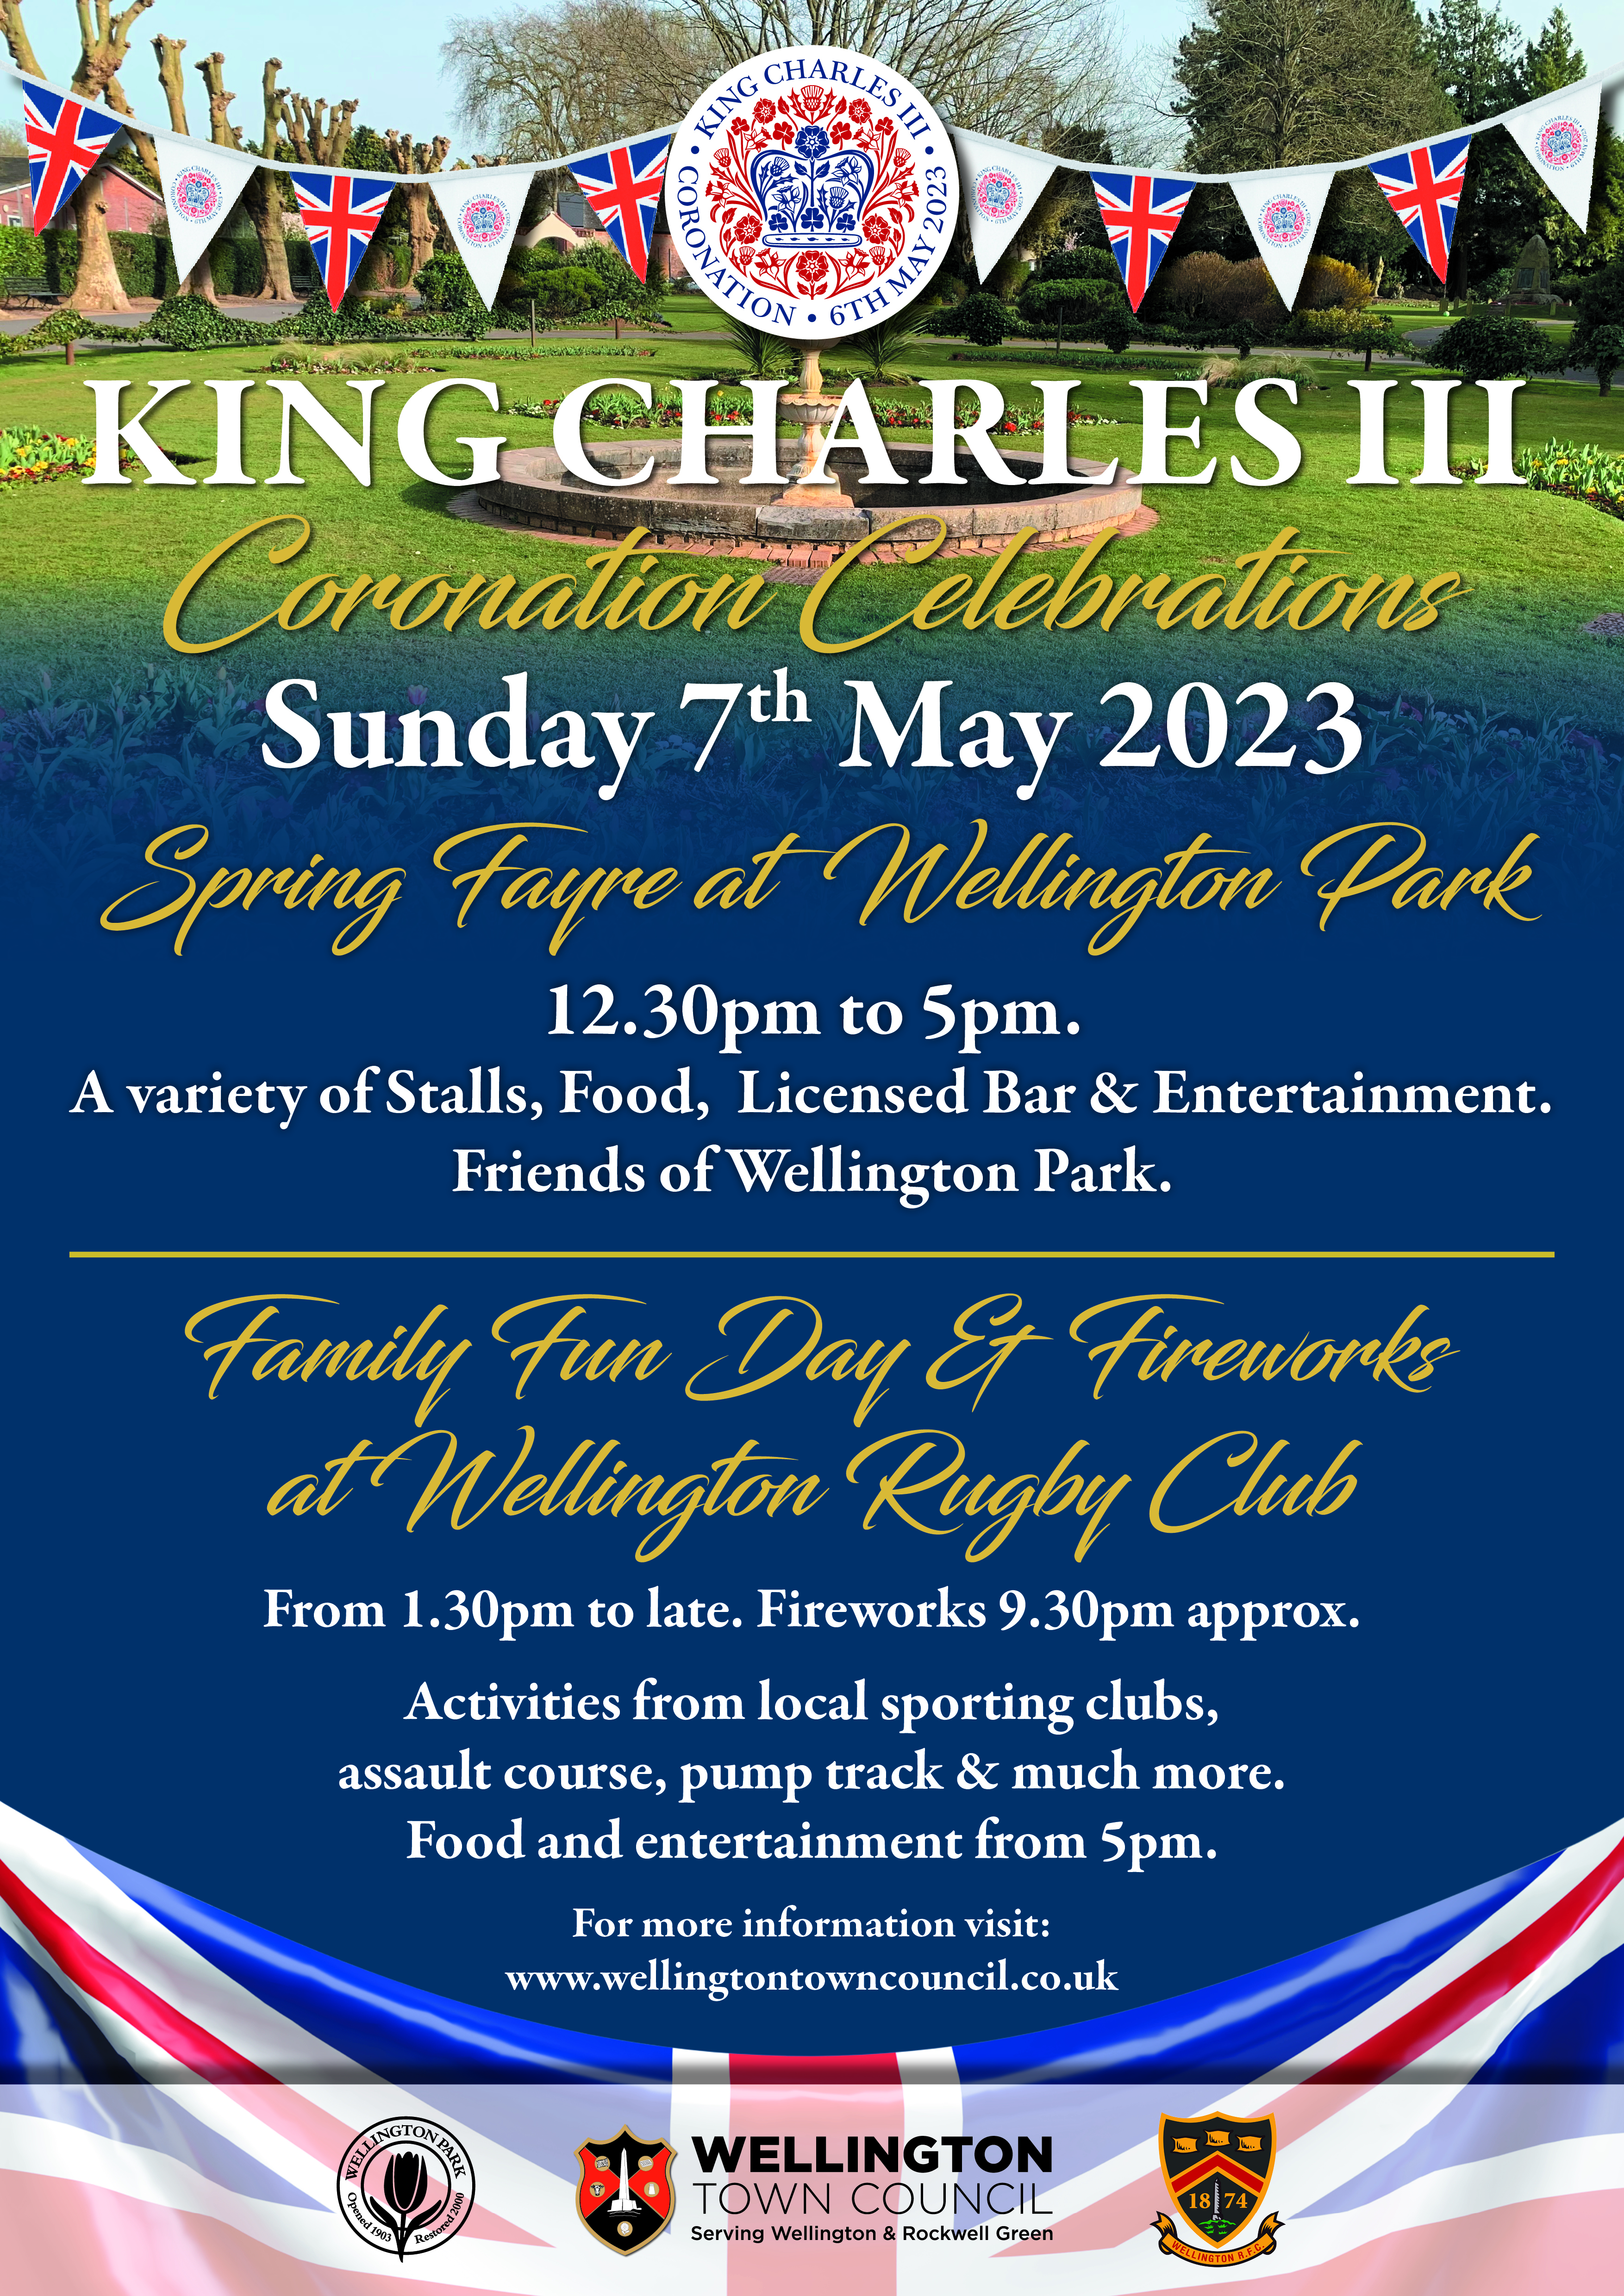 King Charles III Coronation Celebrations Sunday 7th May 2023. Spring Fayre at Wellington Park, 12:30 to 5pm. A variety of stalls, licensed bar and entertainment. Friends of Wellington Park. Family Fun Day & Fireworks at Wellington Rugby Club from 1:30pm to late. Fireworks 9:30pm approx. Activities from local sporting clubs, assault course, pump track and much more. Food and entertainment from 5pm.